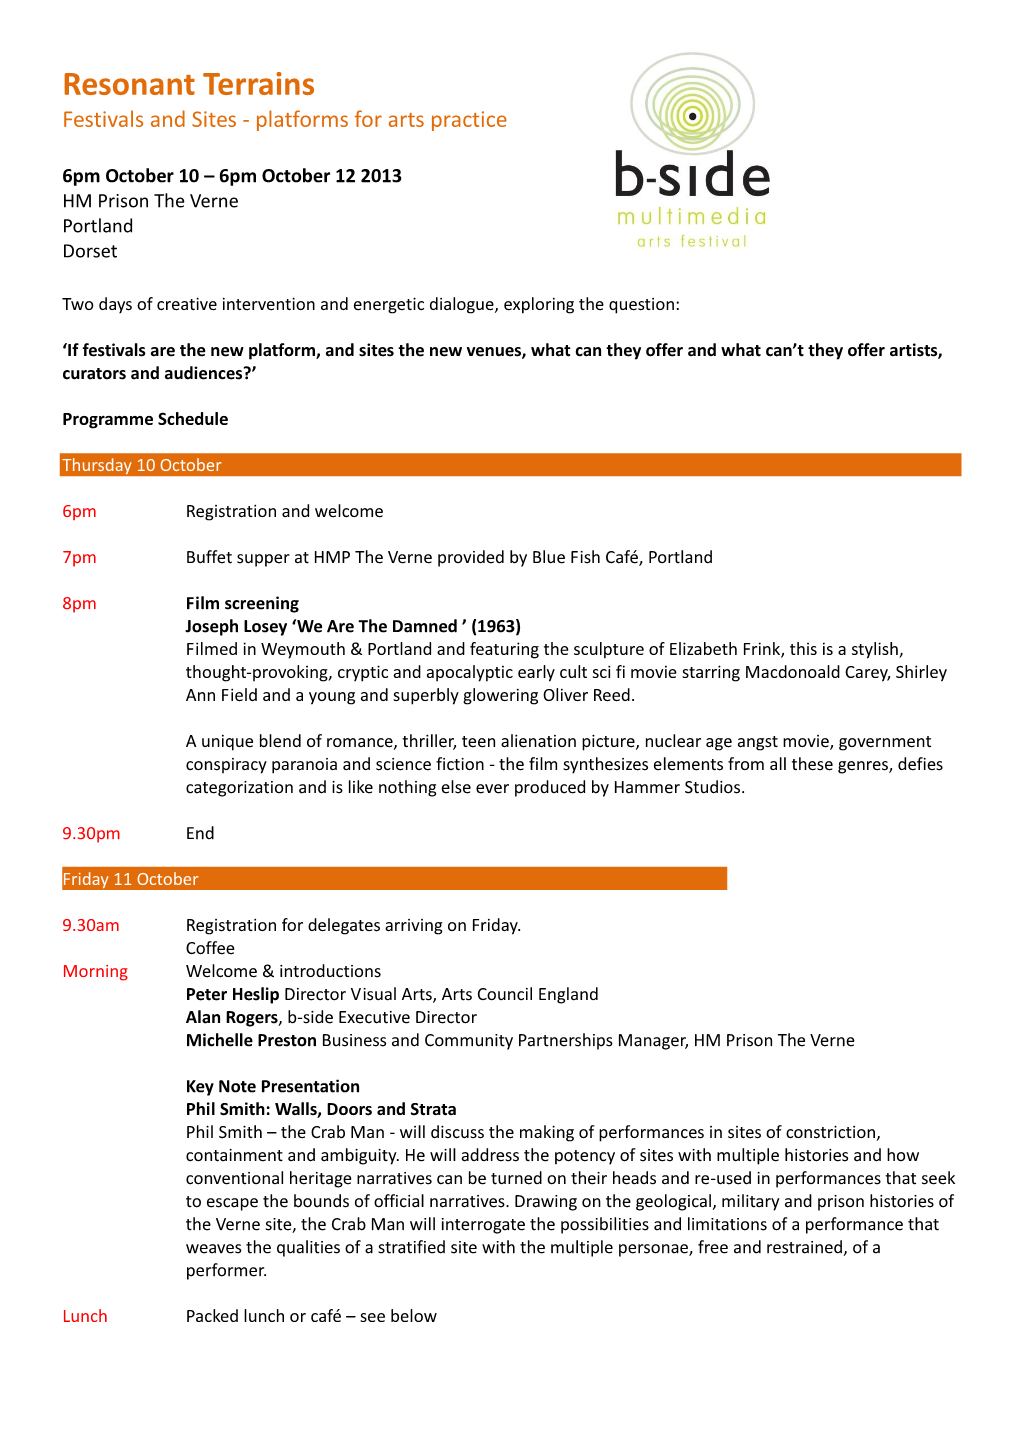 To Download a Symposium Programme